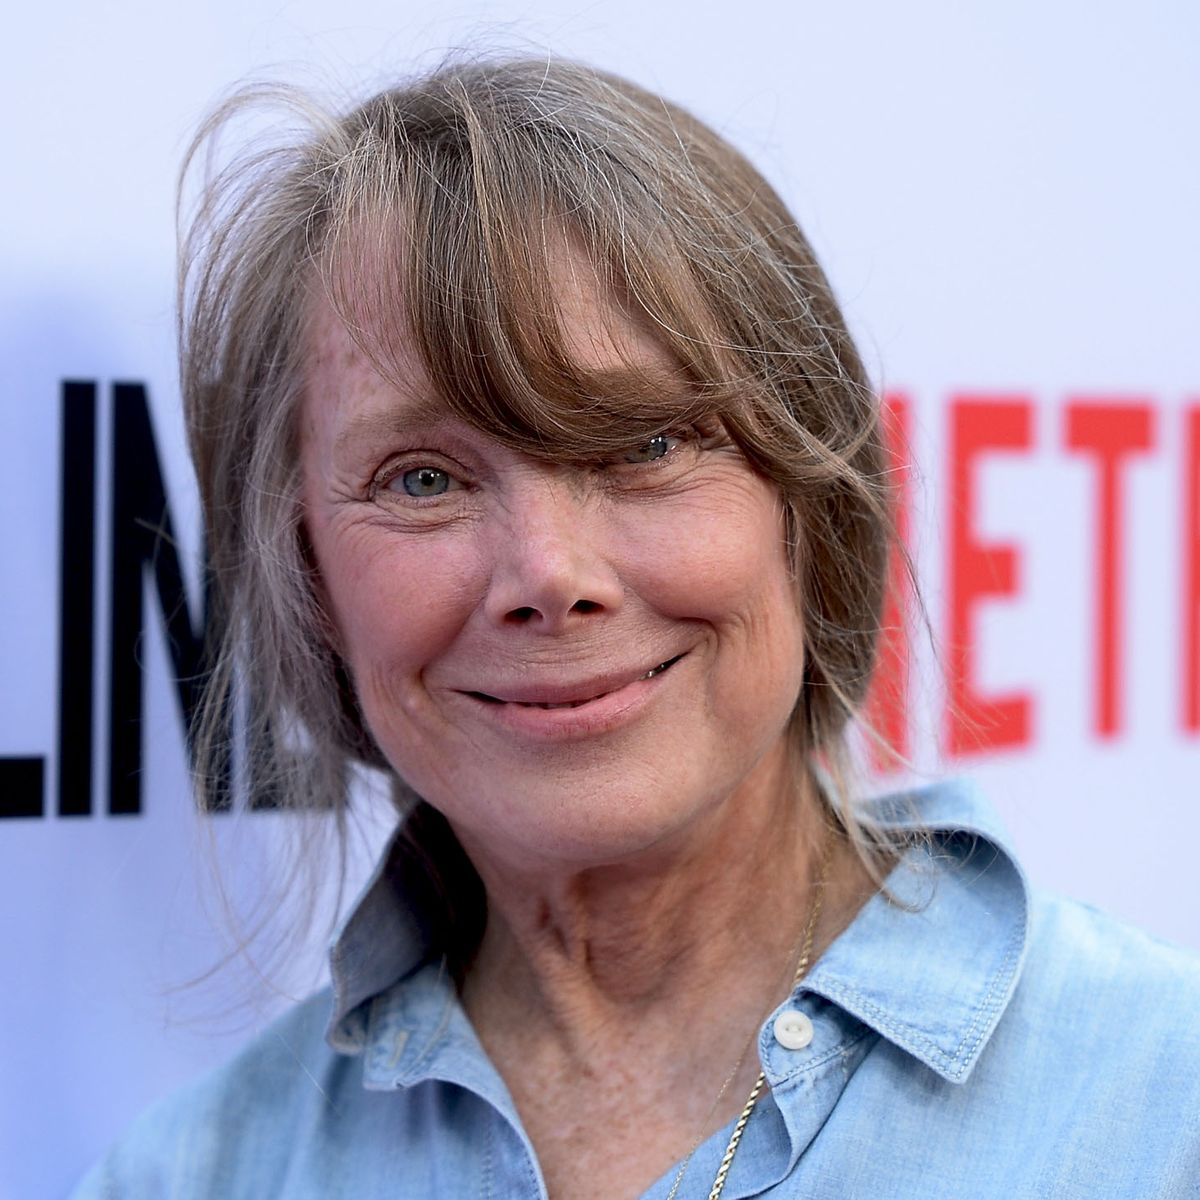 Page dedicated to the beautiful sissy spacek i will post classic photos of ...